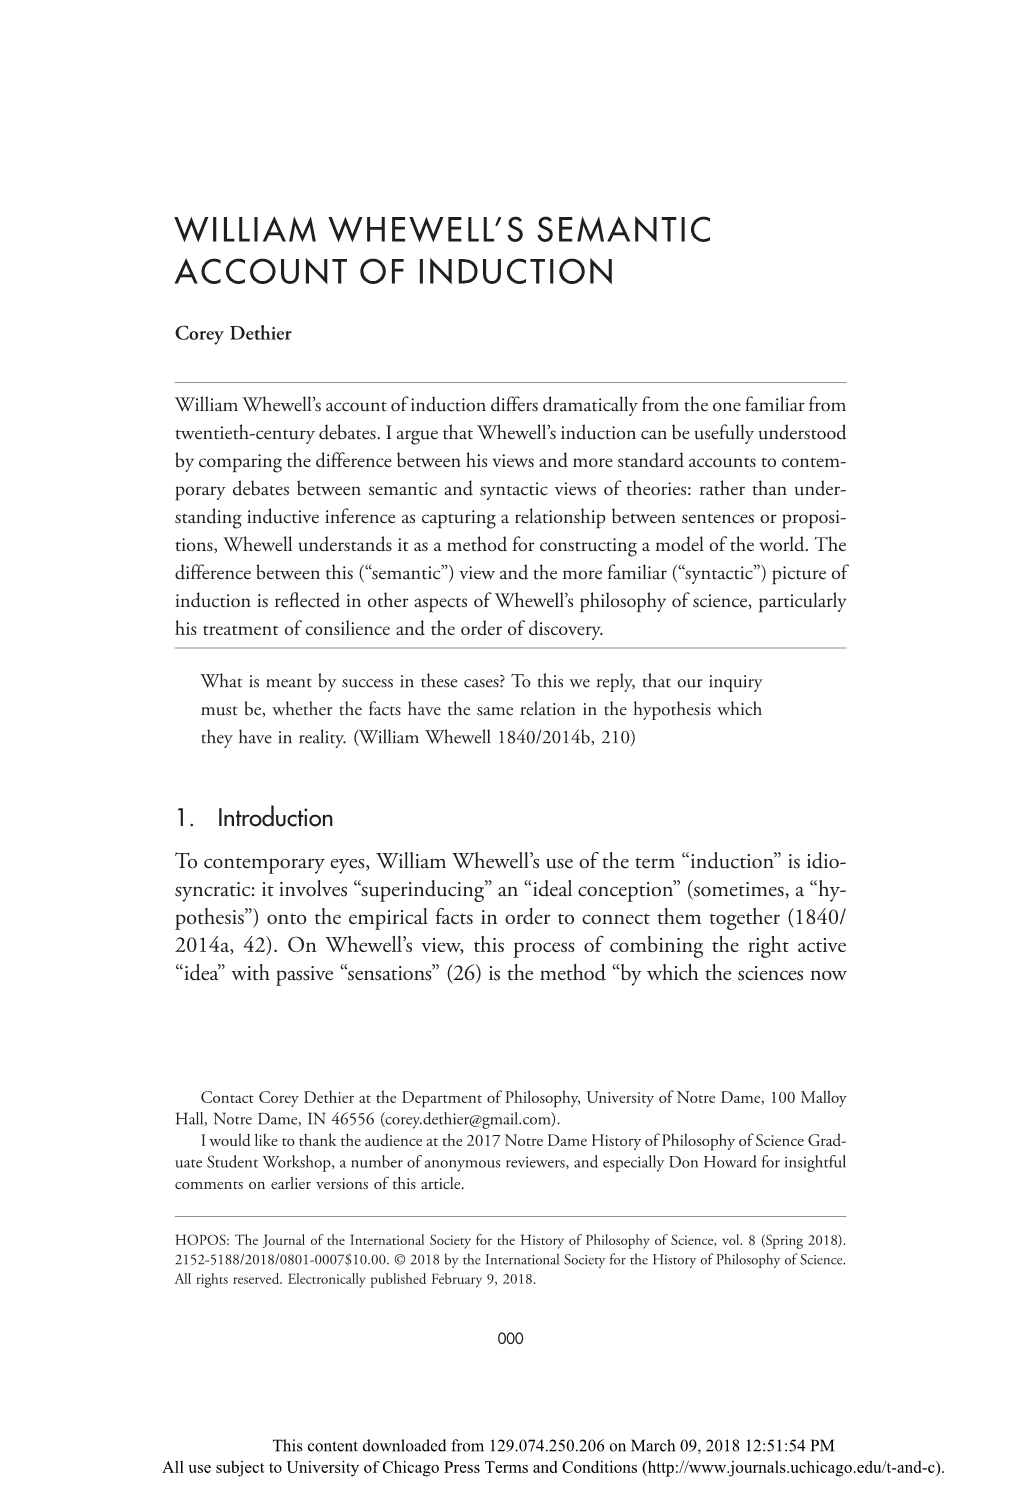 William Whewell's Semantic Account of Induction